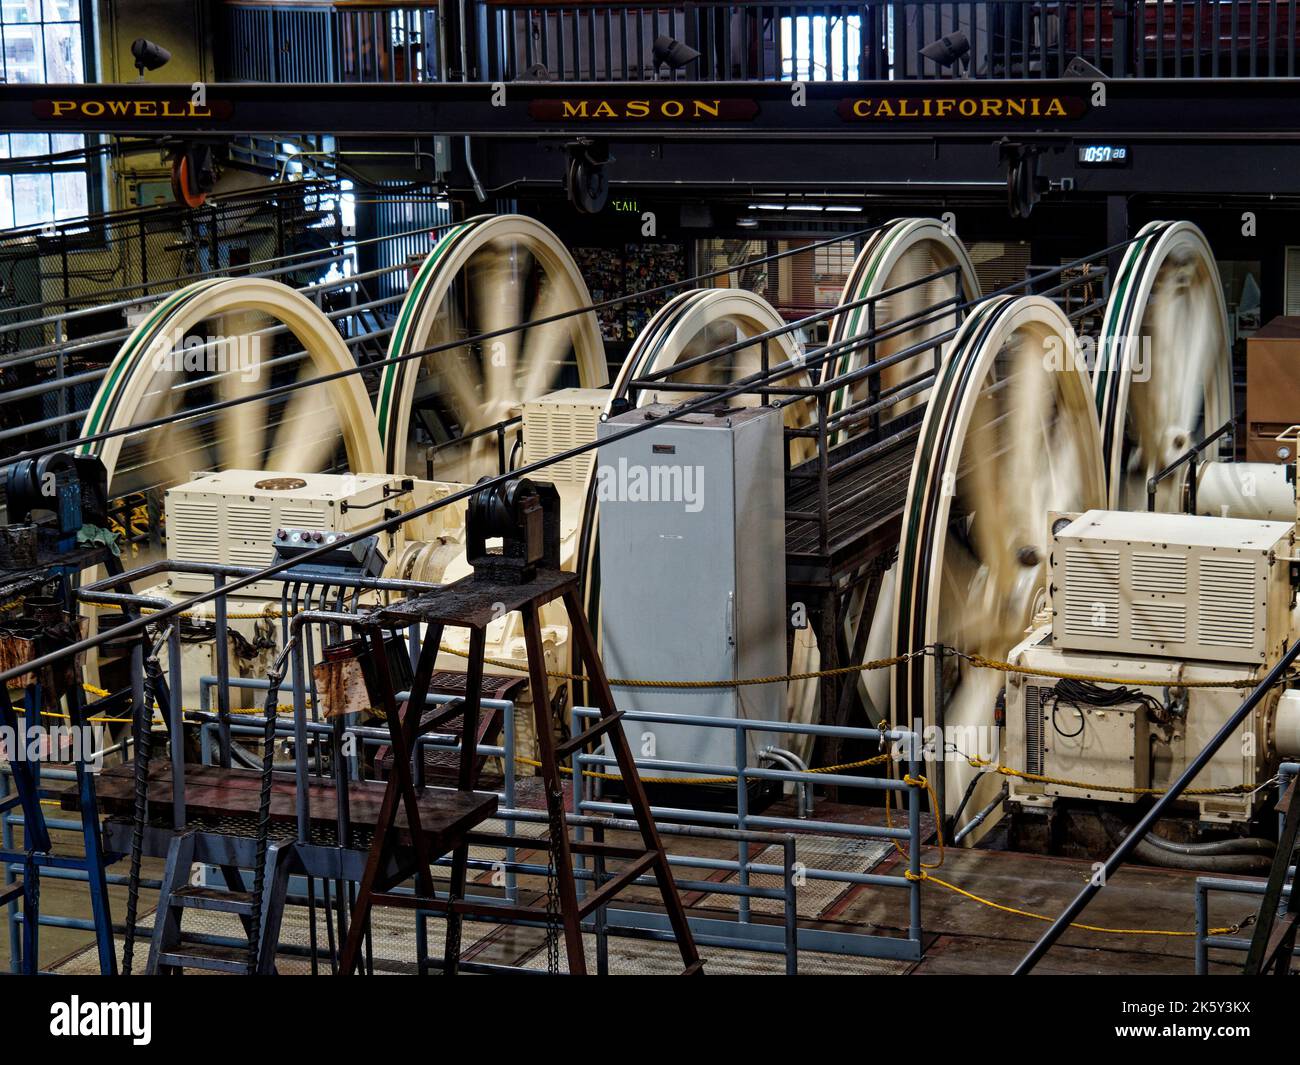 The power house of the San Francisco cable car system located in Washington-Mason powerhouse and carbarn on Nob Hill, part of the Cable Car Museum. Stock Photo